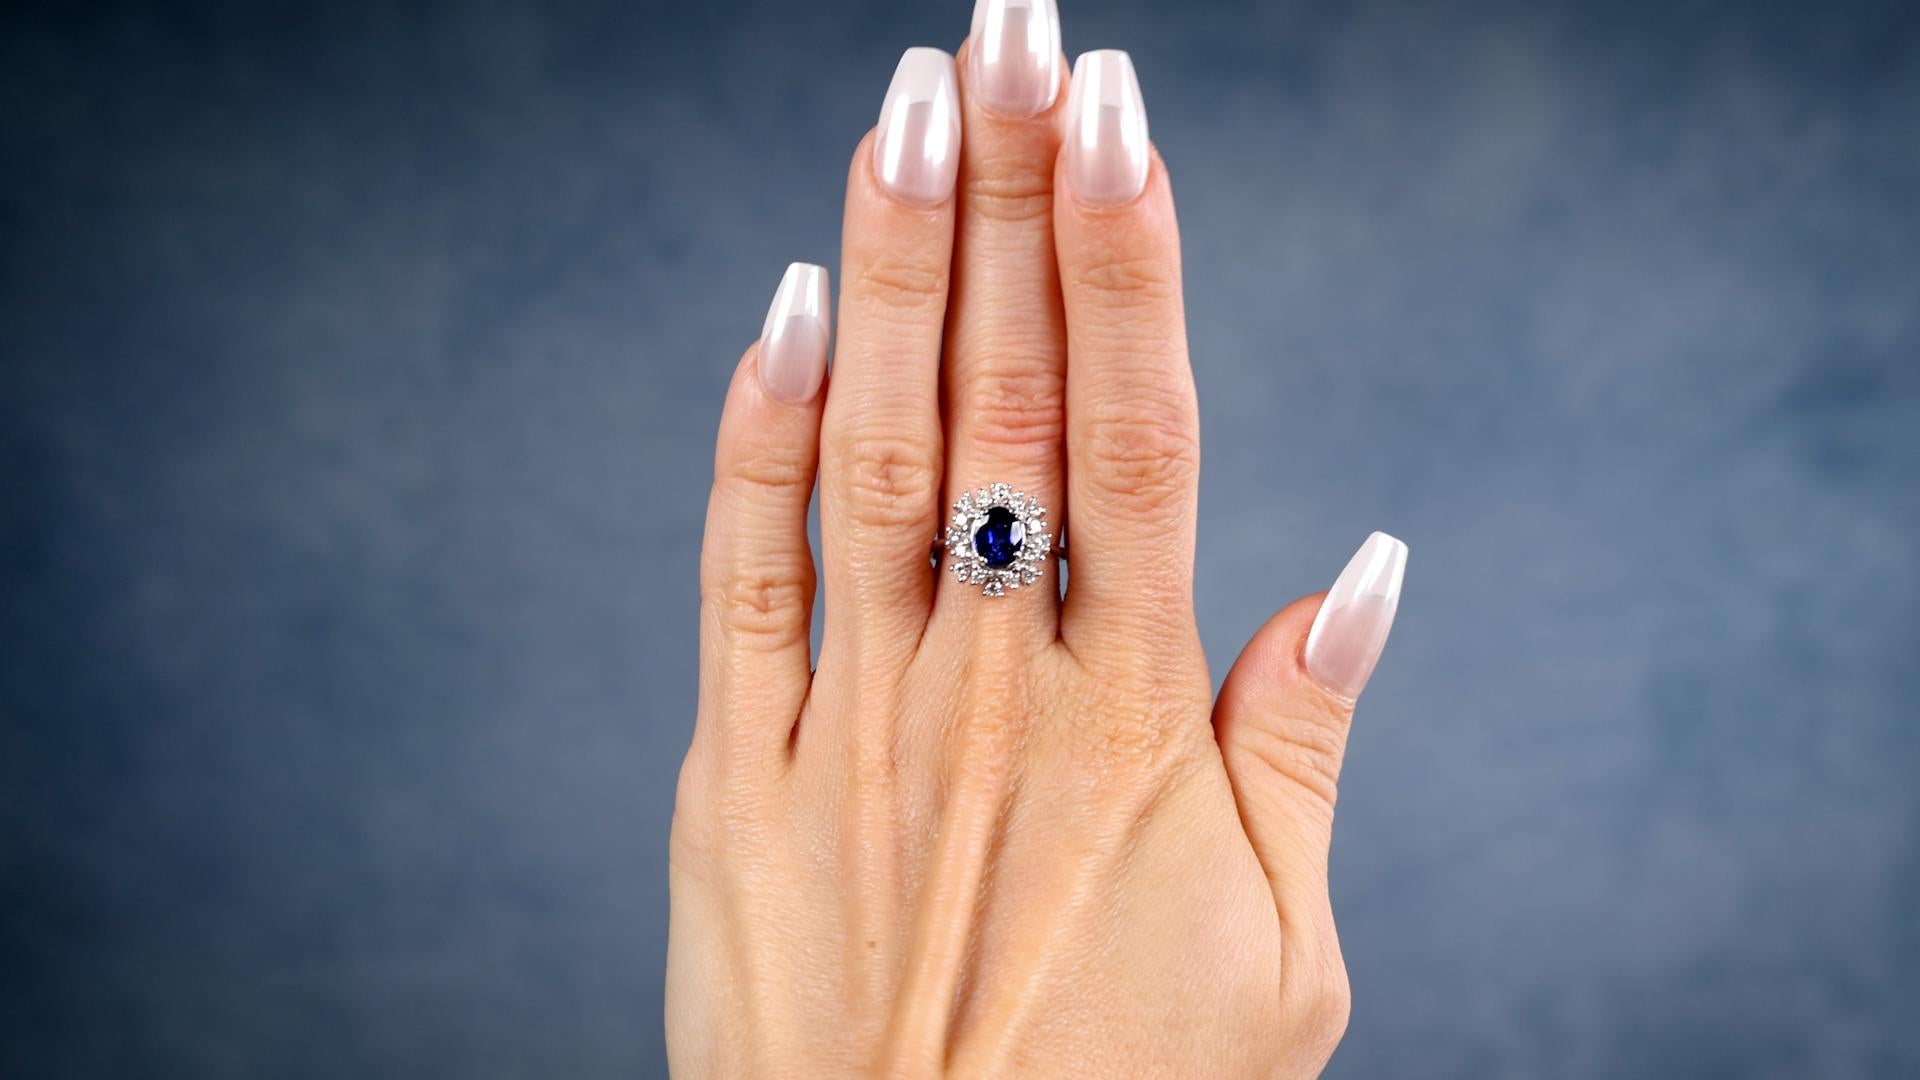 One Vintage Sapphire Diamond Platinum Cluster Ring. Featuring one oval mixed cut sapphire weighing approximately 1.40 carats. Accented by 16 round brilliant cut diamonds with a total weight of approximately 0.80 carat, graded near-colorless, VS-SI